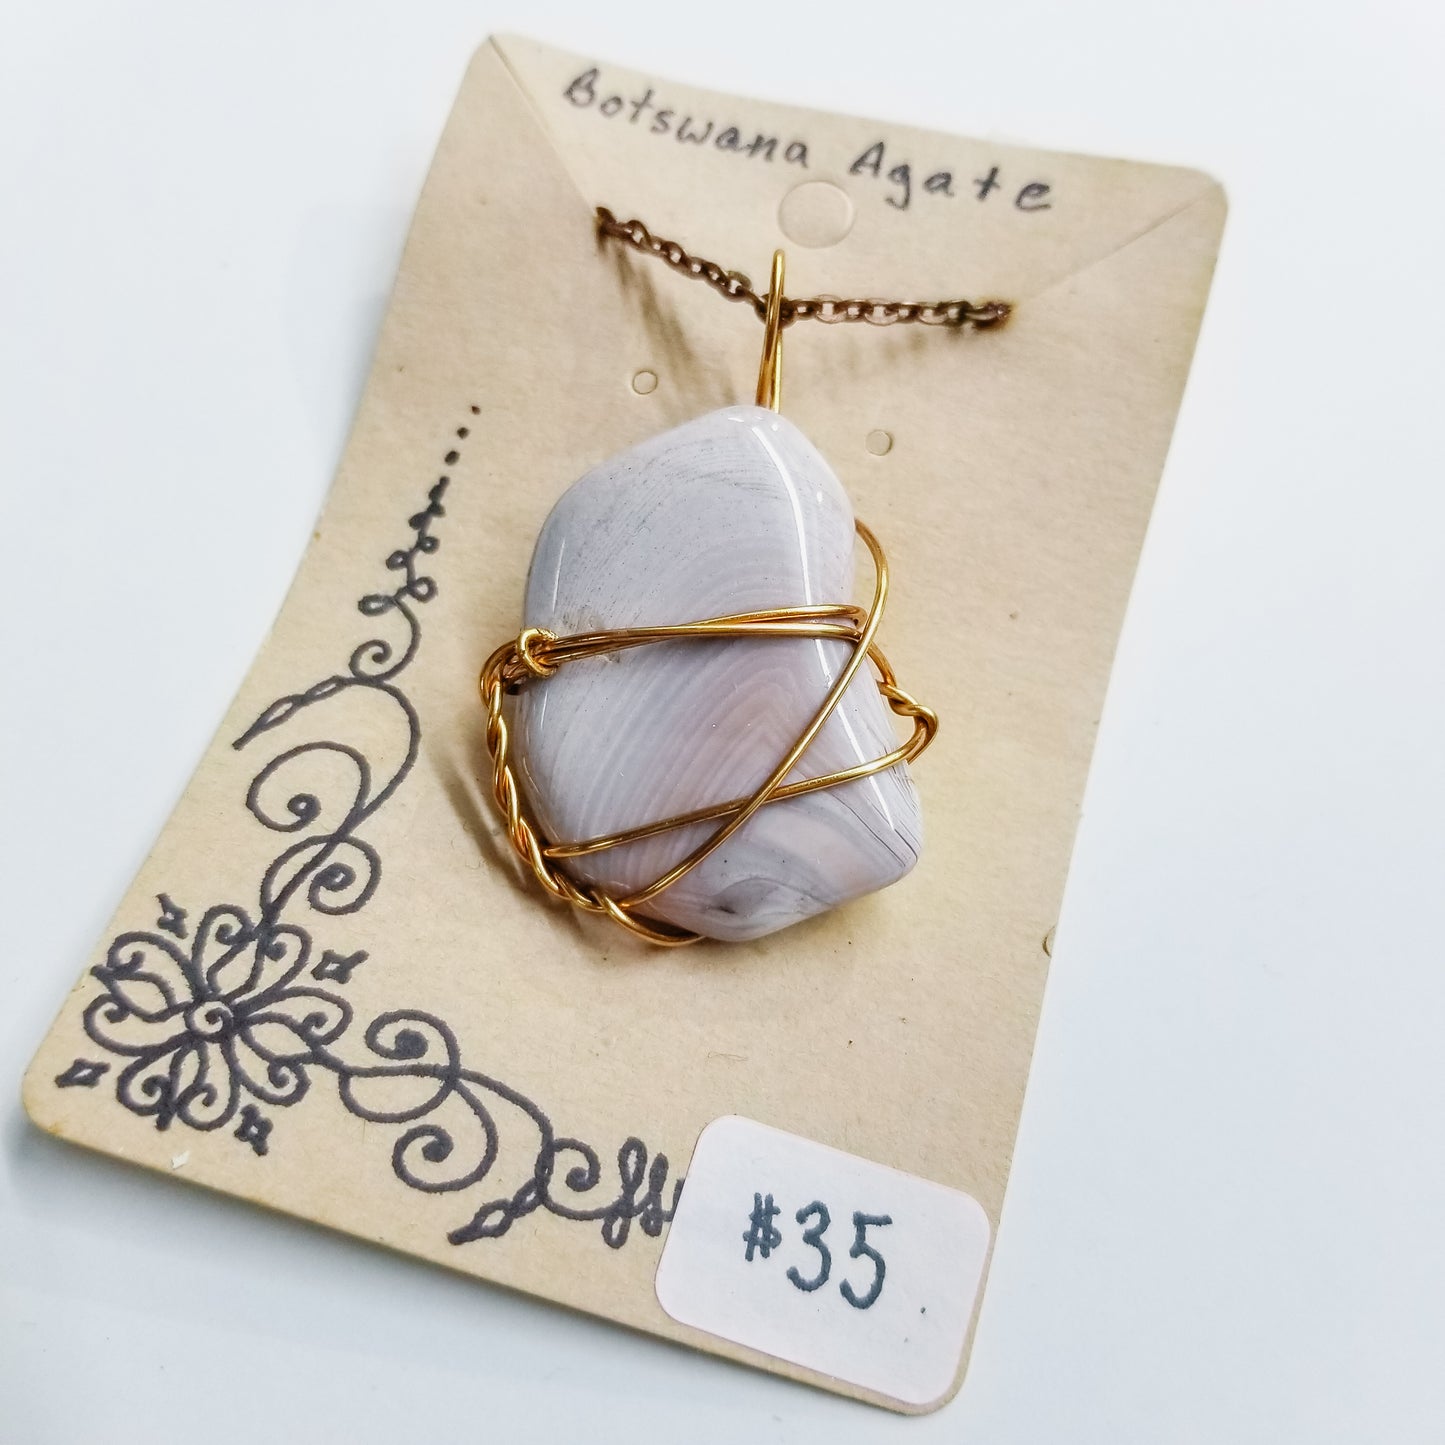 Botswana Agate Handwrapped Necklace